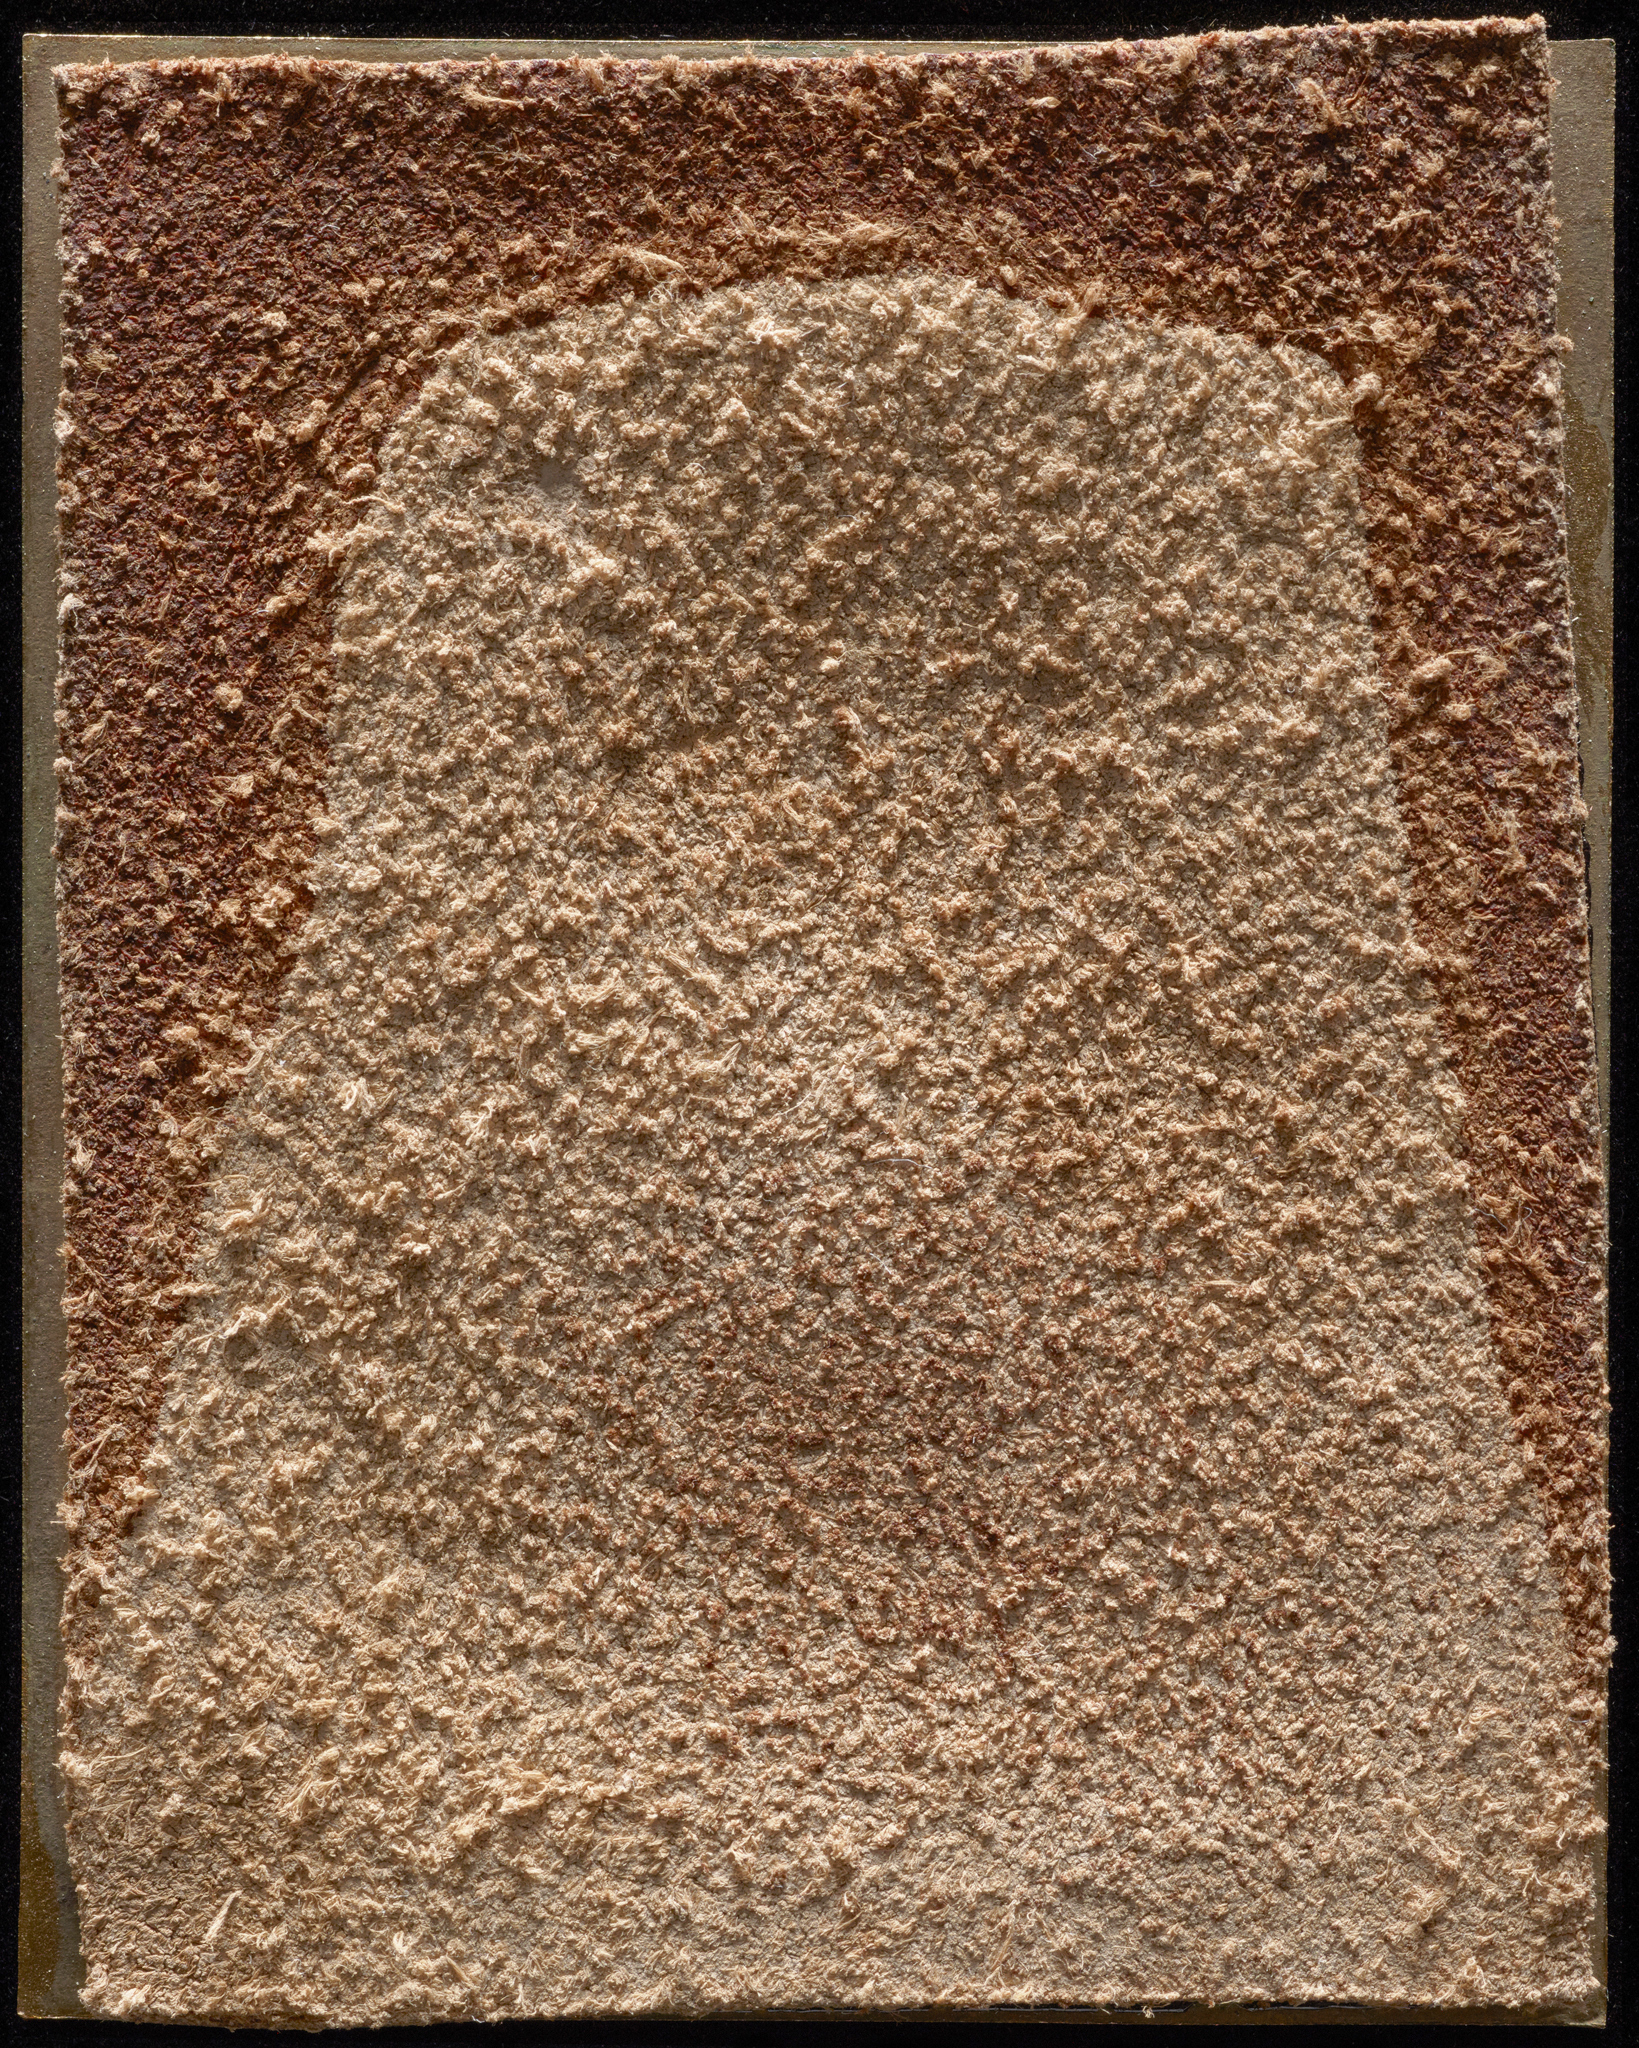 Back of a leather photograph with a dark stain along the top left and top right edges.